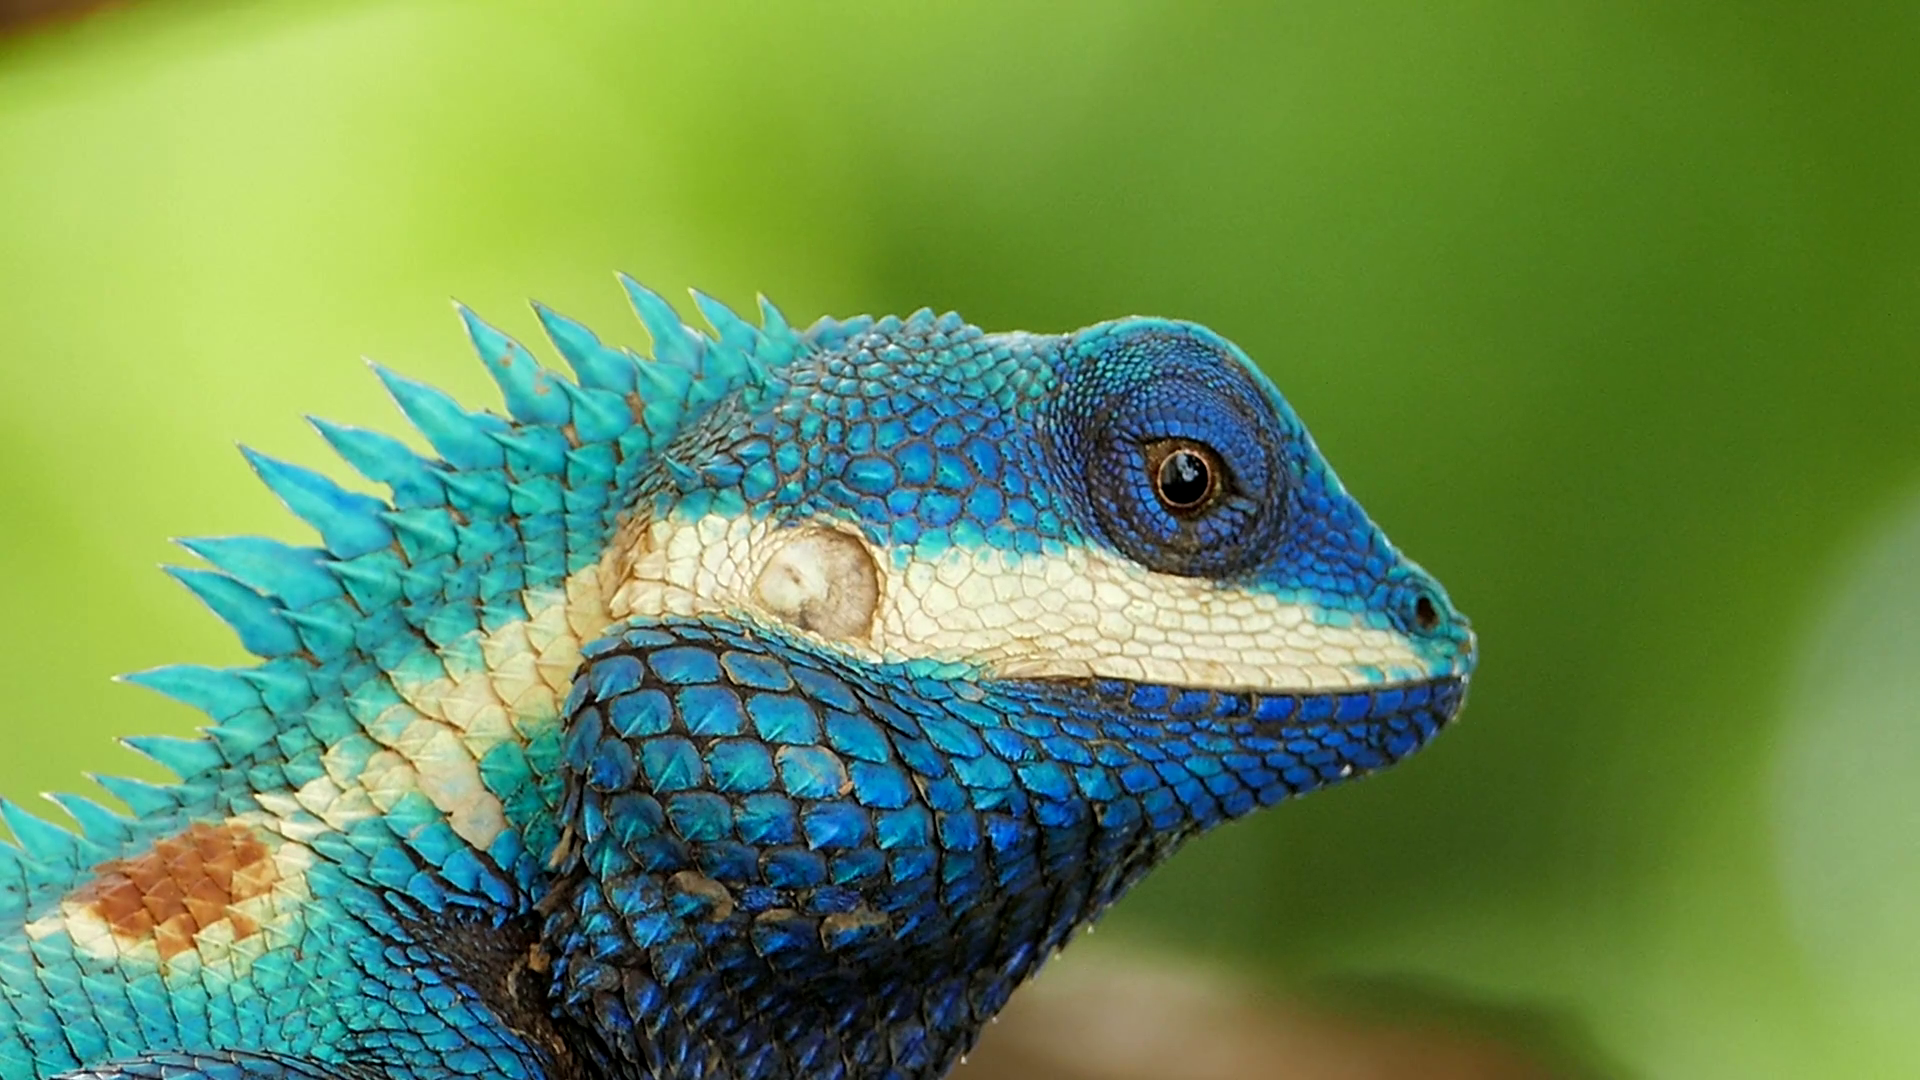 Lizard (Blue-crested Lizard) on the tree in tropical rain forest ...